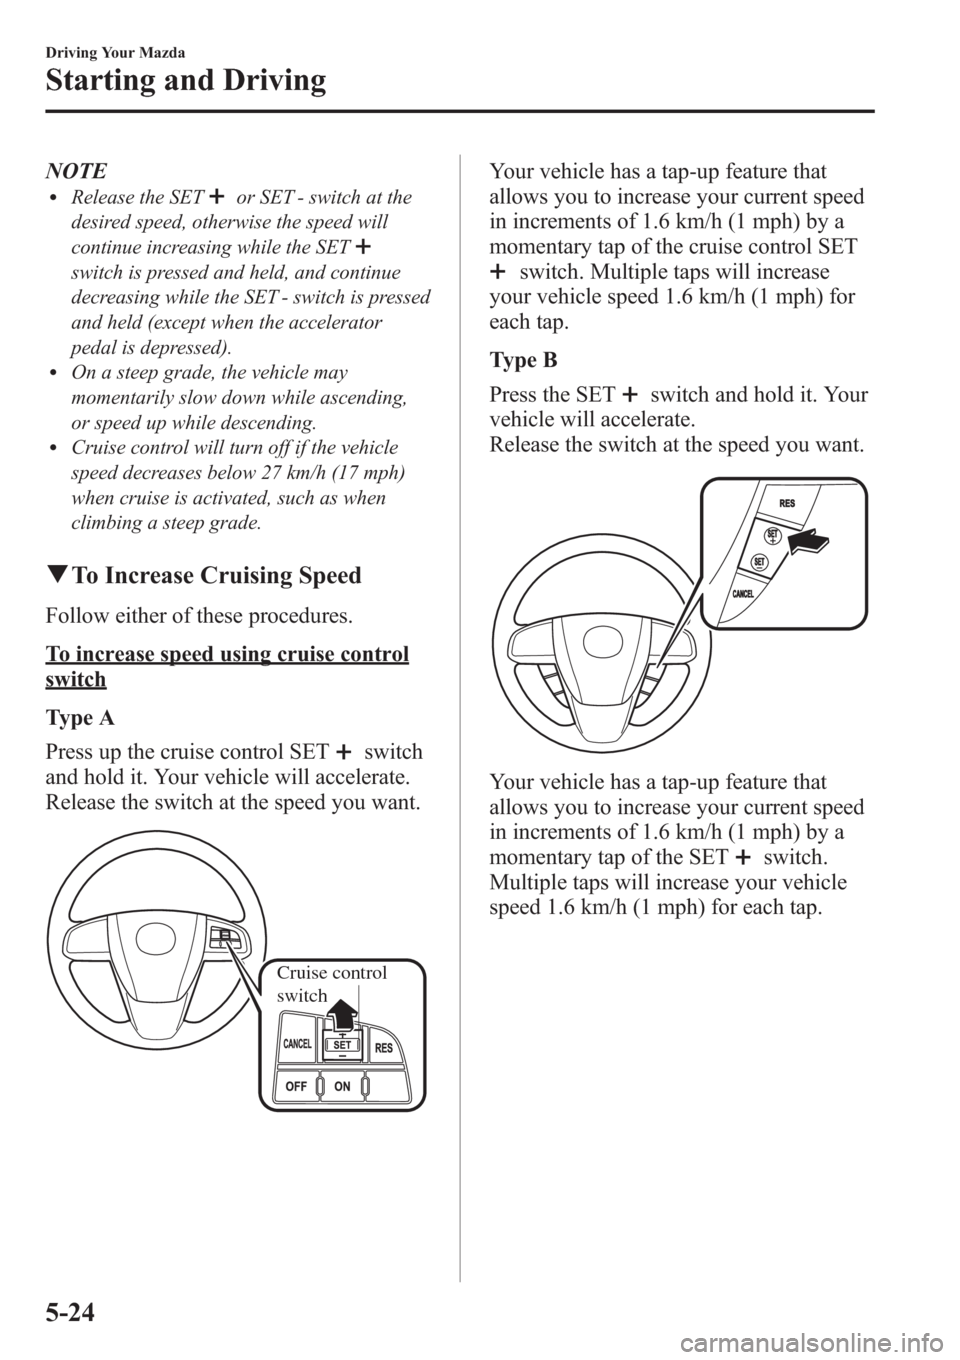 MAZDA MODEL 3 HATCHBACK 2013  Owners Manual (in English) NOTElRelease the SETor SET - switch at the
desired speed, otherwise the speed will
continue increasing while the SET
switch is pressed and held, and continue
decreasing while the SET - switch is press